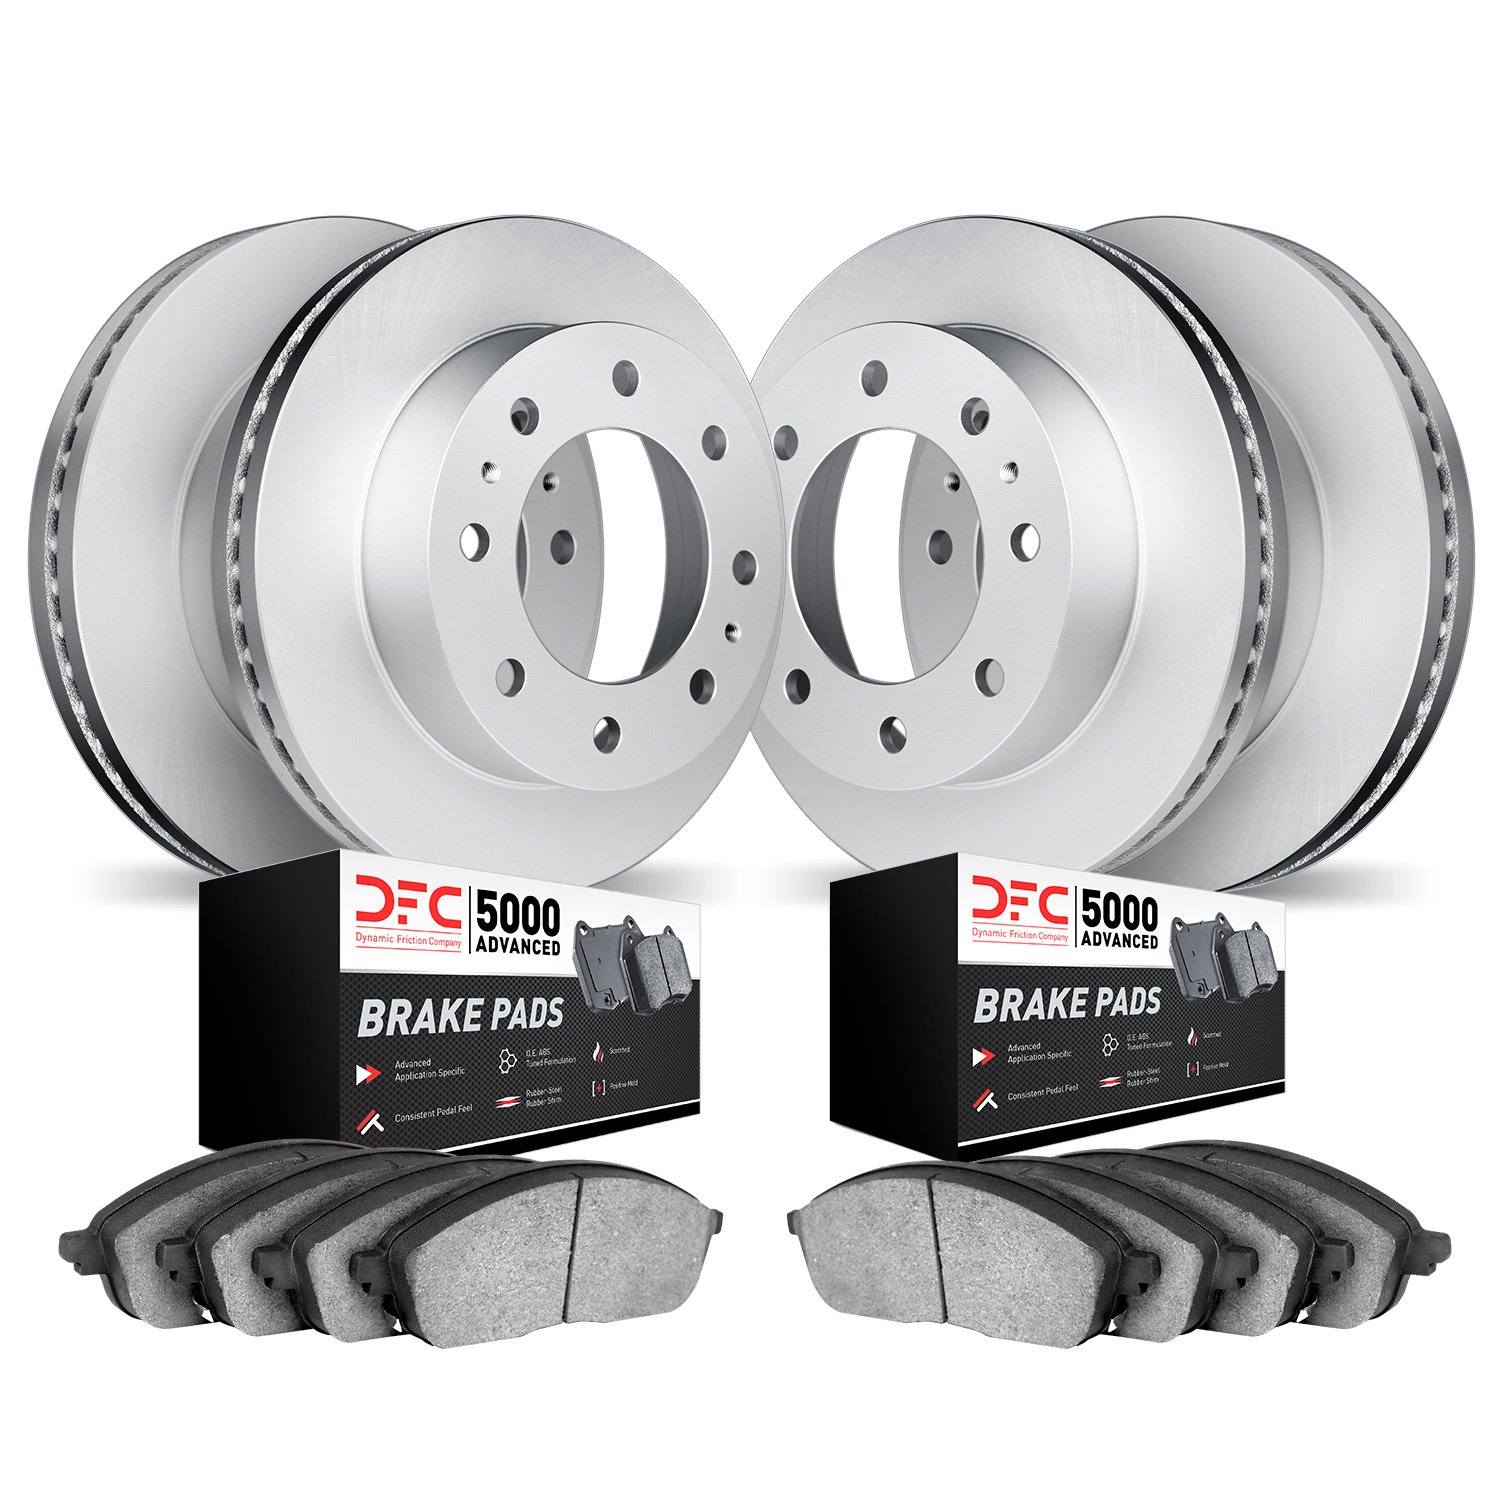 4504-54067 Geospec Brake Rotors w/5000 Advanced Brake Pads Kit, Fits Select Ford/Lincoln/Mercury/Mazda, Position: Front and Rear